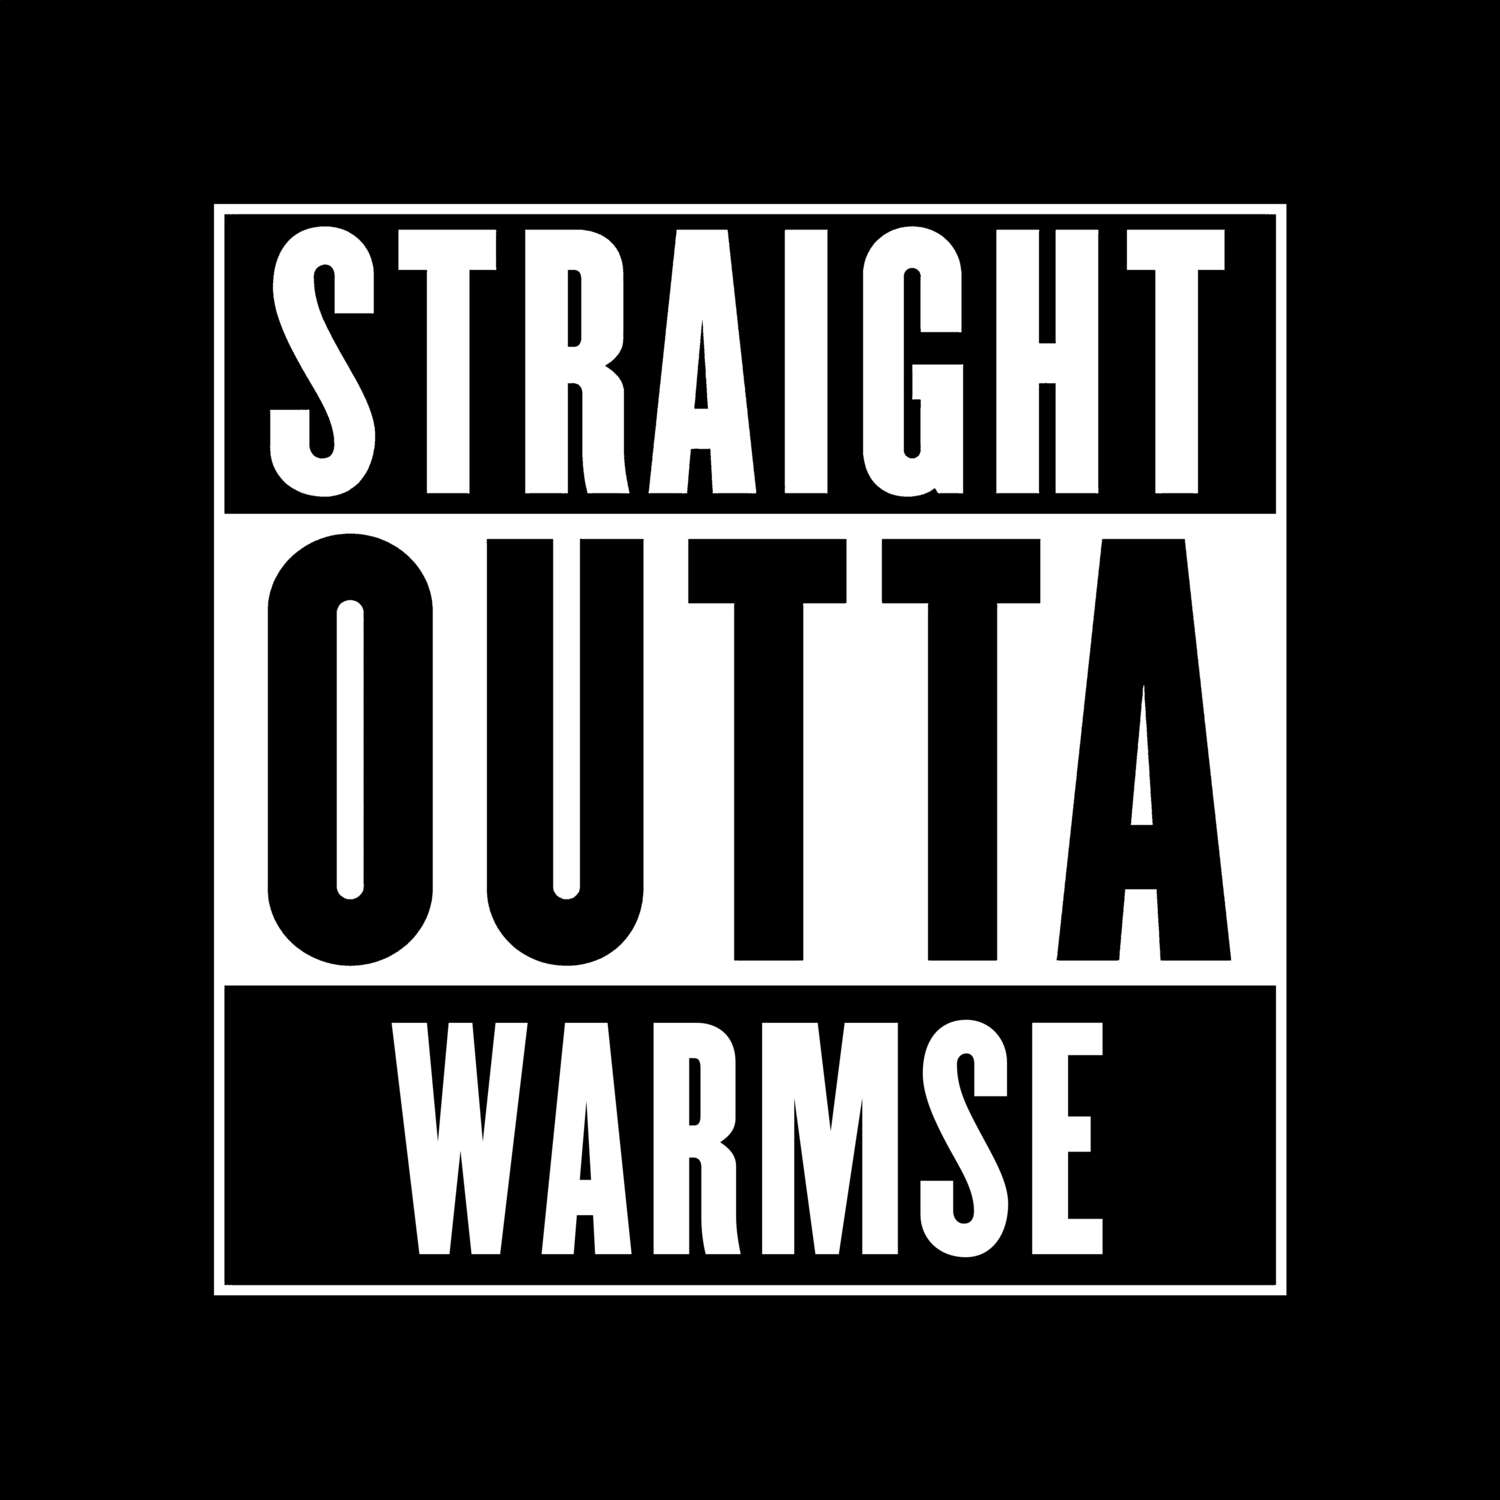 Warmse T-Shirt »Straight Outta«